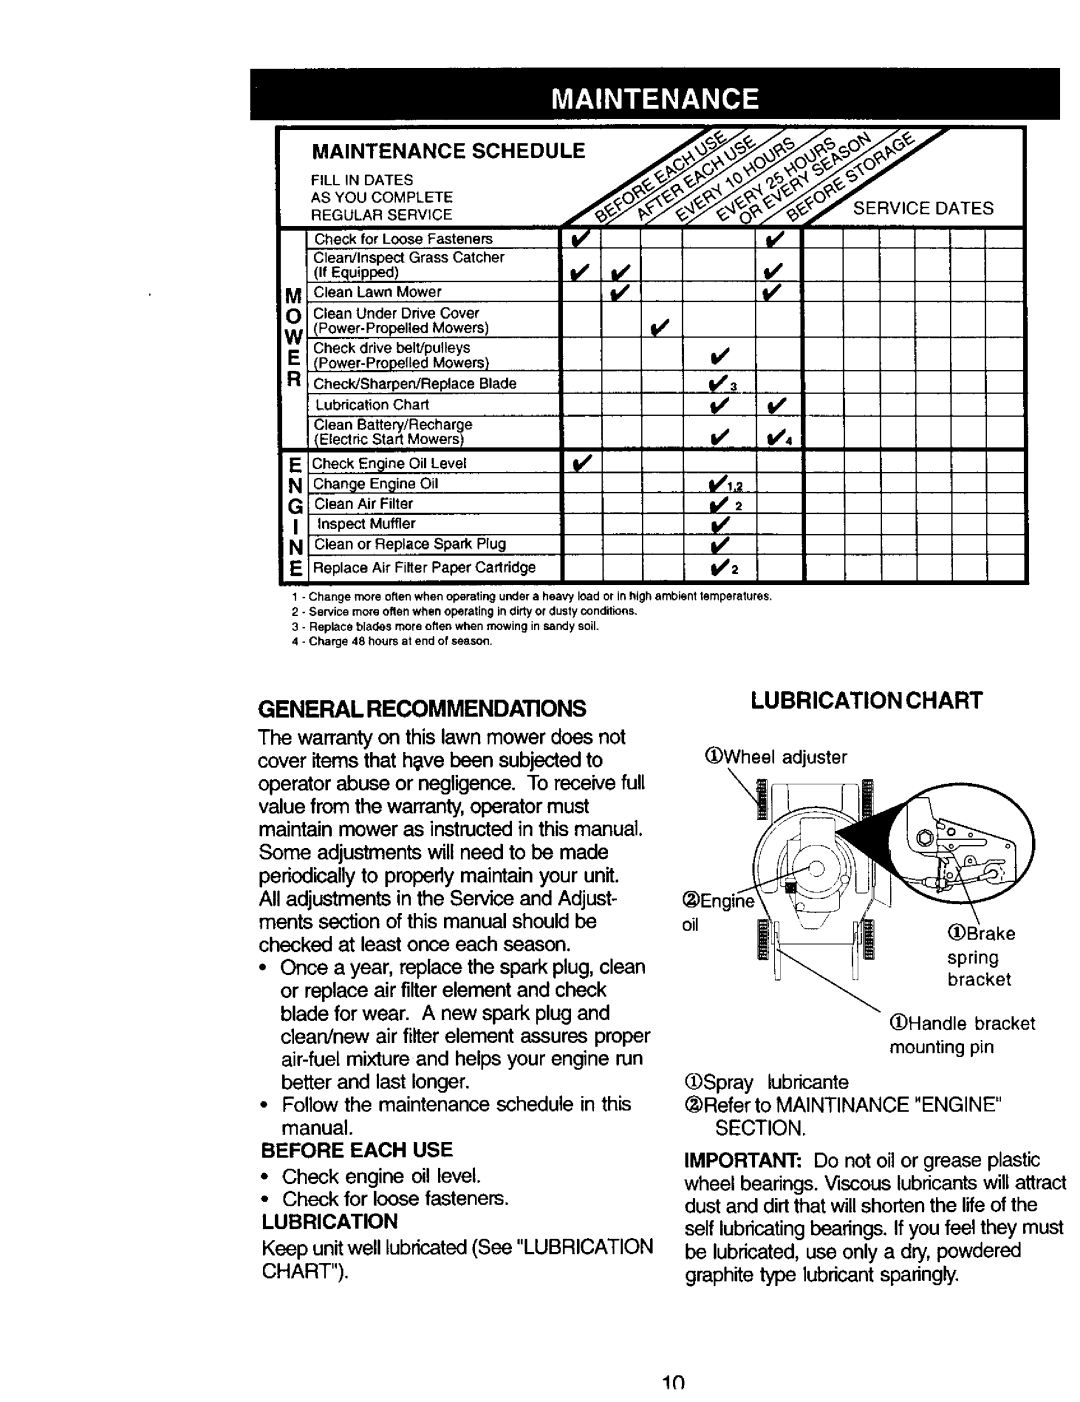 Craftsman 917.38741 owner manual Generalrecommenda Ons, Lubrication Chart 